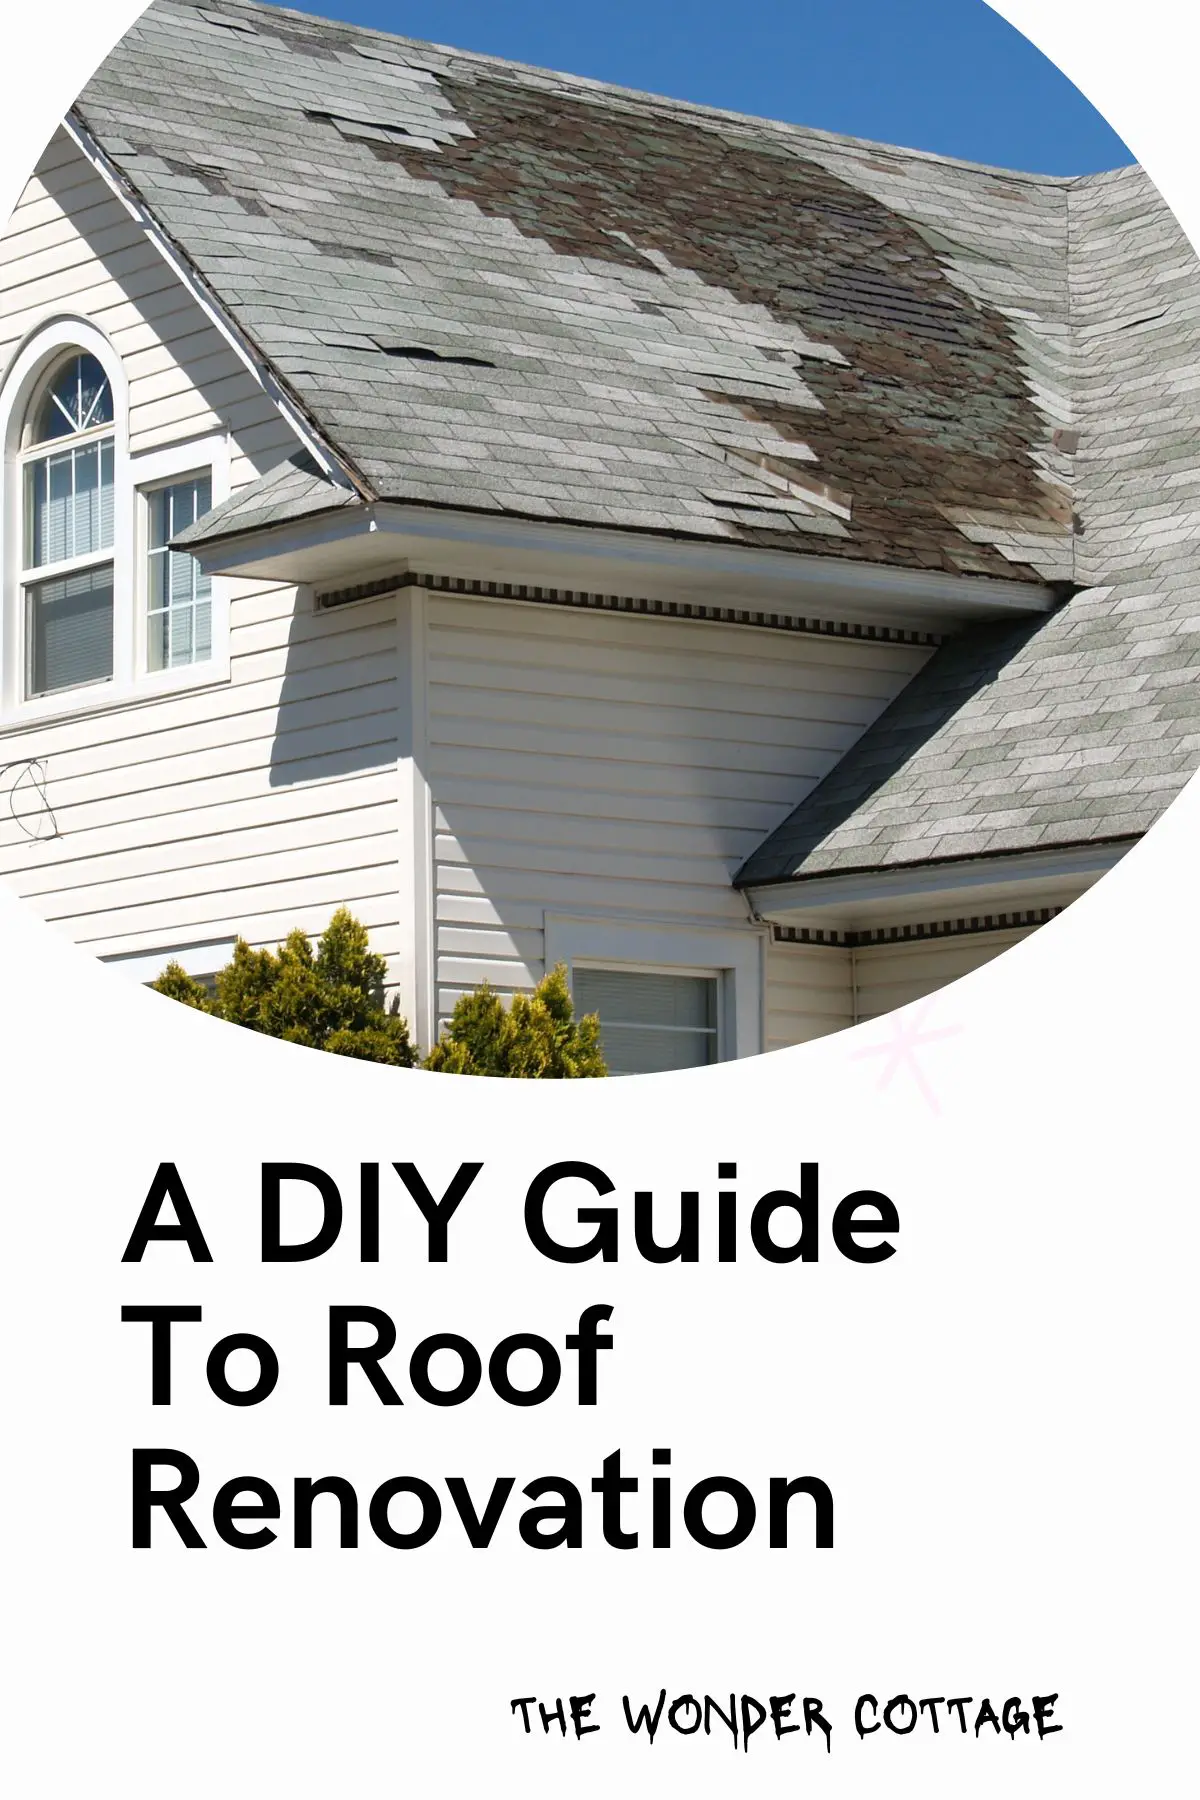 3 steps to do your roof renovation yourself